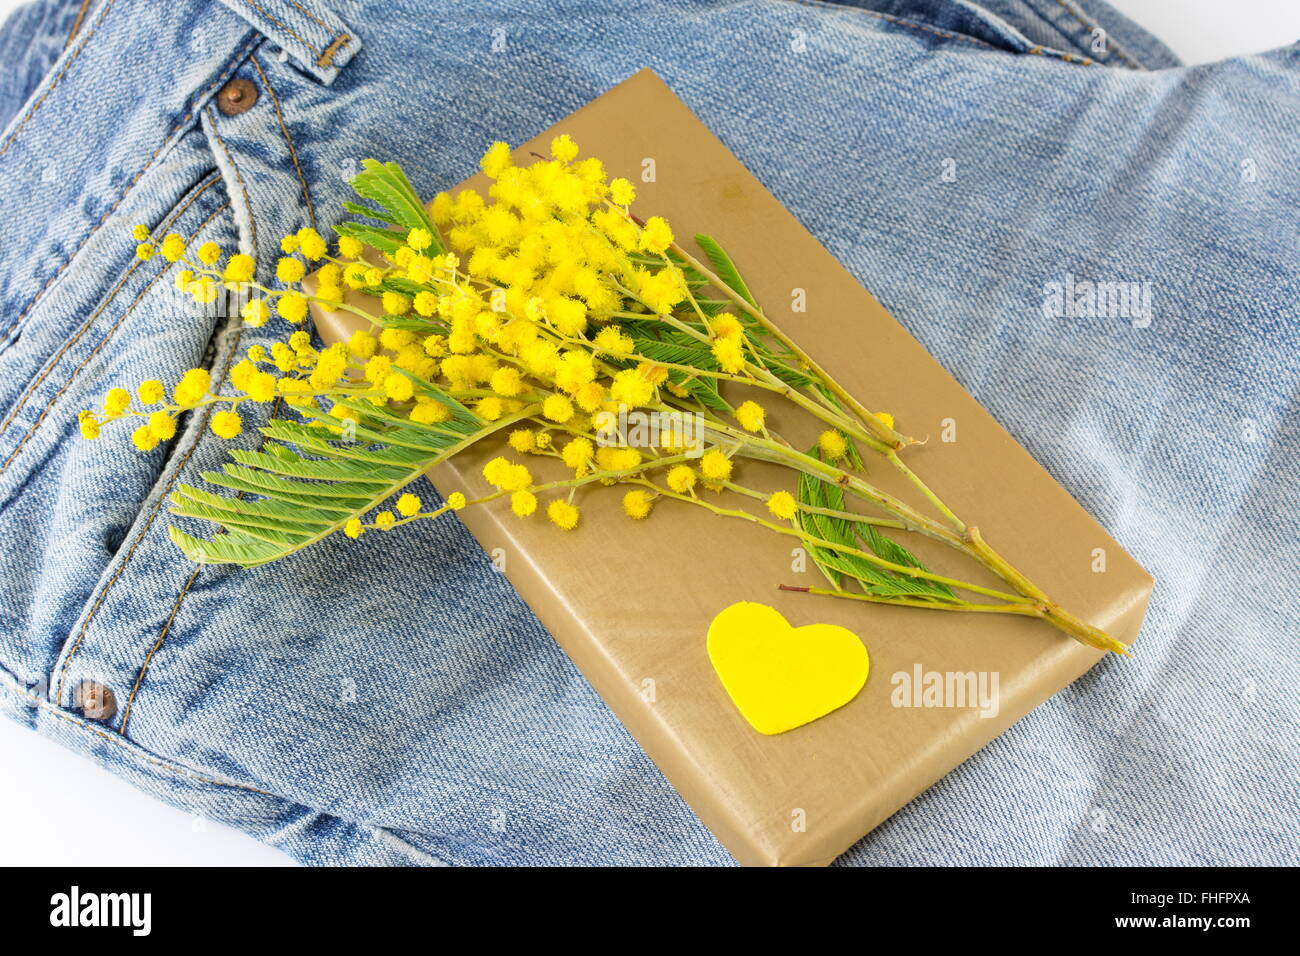 Bouquet of mimosa pudica and a wrapped present on blue jeans Stock Photo